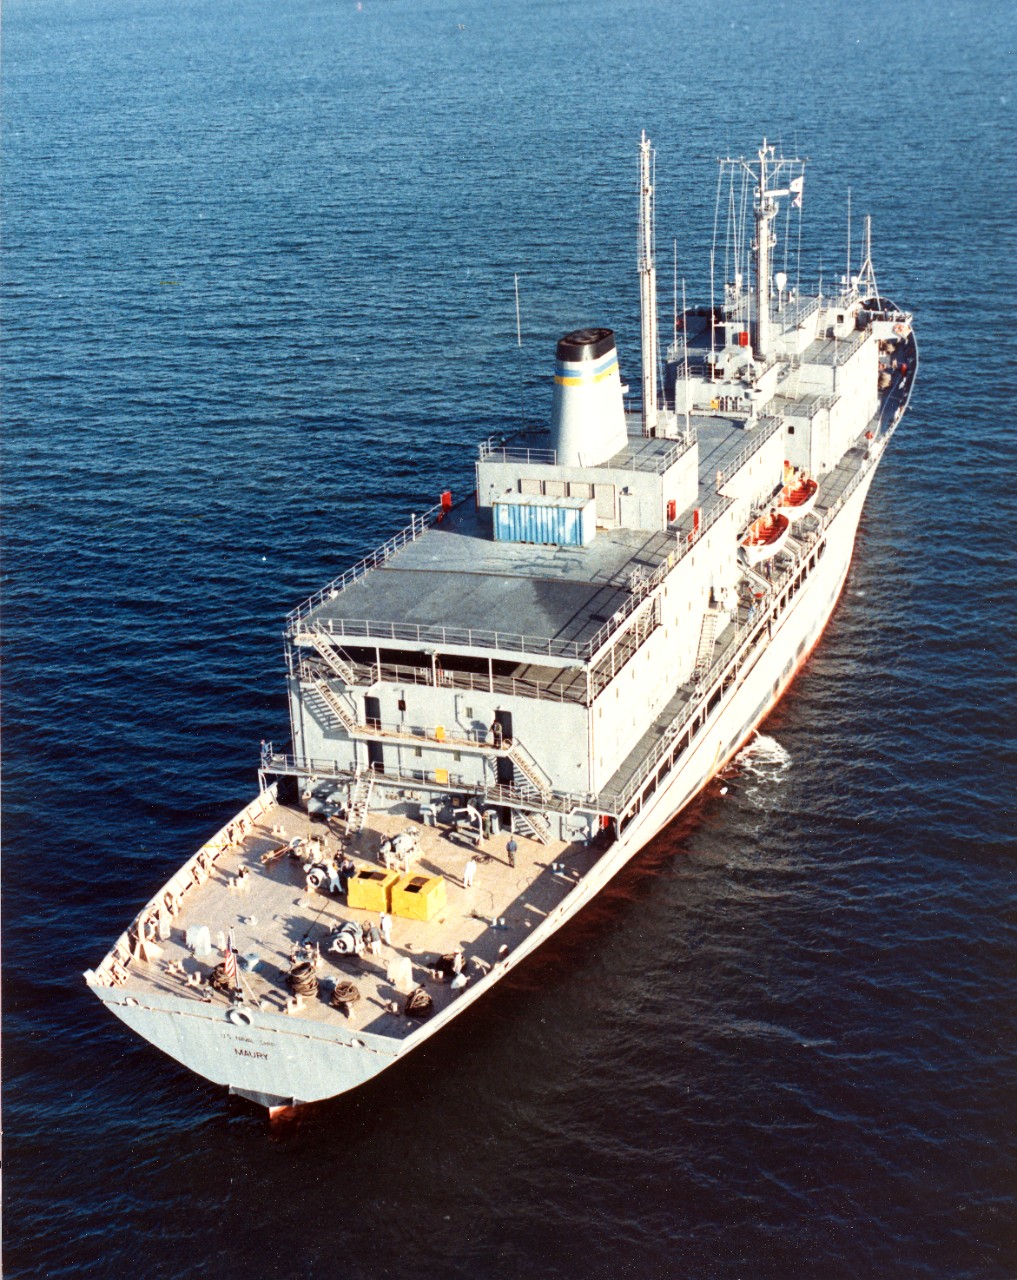 Collection of 52 images related to ships operated by the Military Sealift Command, including: USNS Waters (T-AGS-45), USNS Hayes (T-AGOR-16), USNS Range Sentinel (T-AGM-22), USNS Redstone (T-AGM-20), USNS Vanguard (T-AG-194), USNS Maury (T-AGS-66...